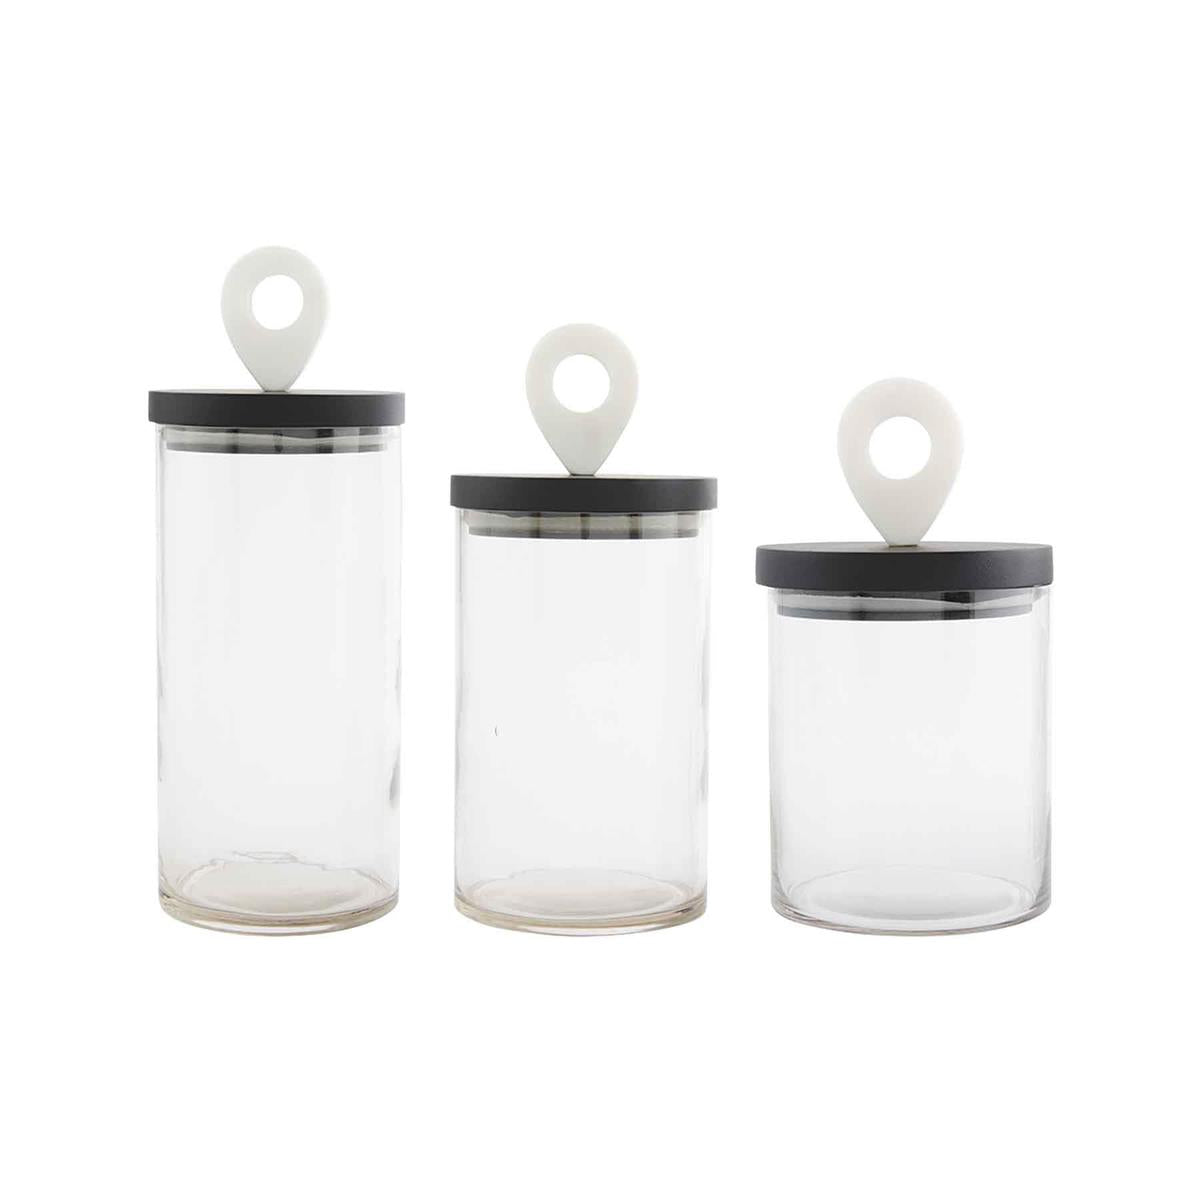 Black & White Glass Containers